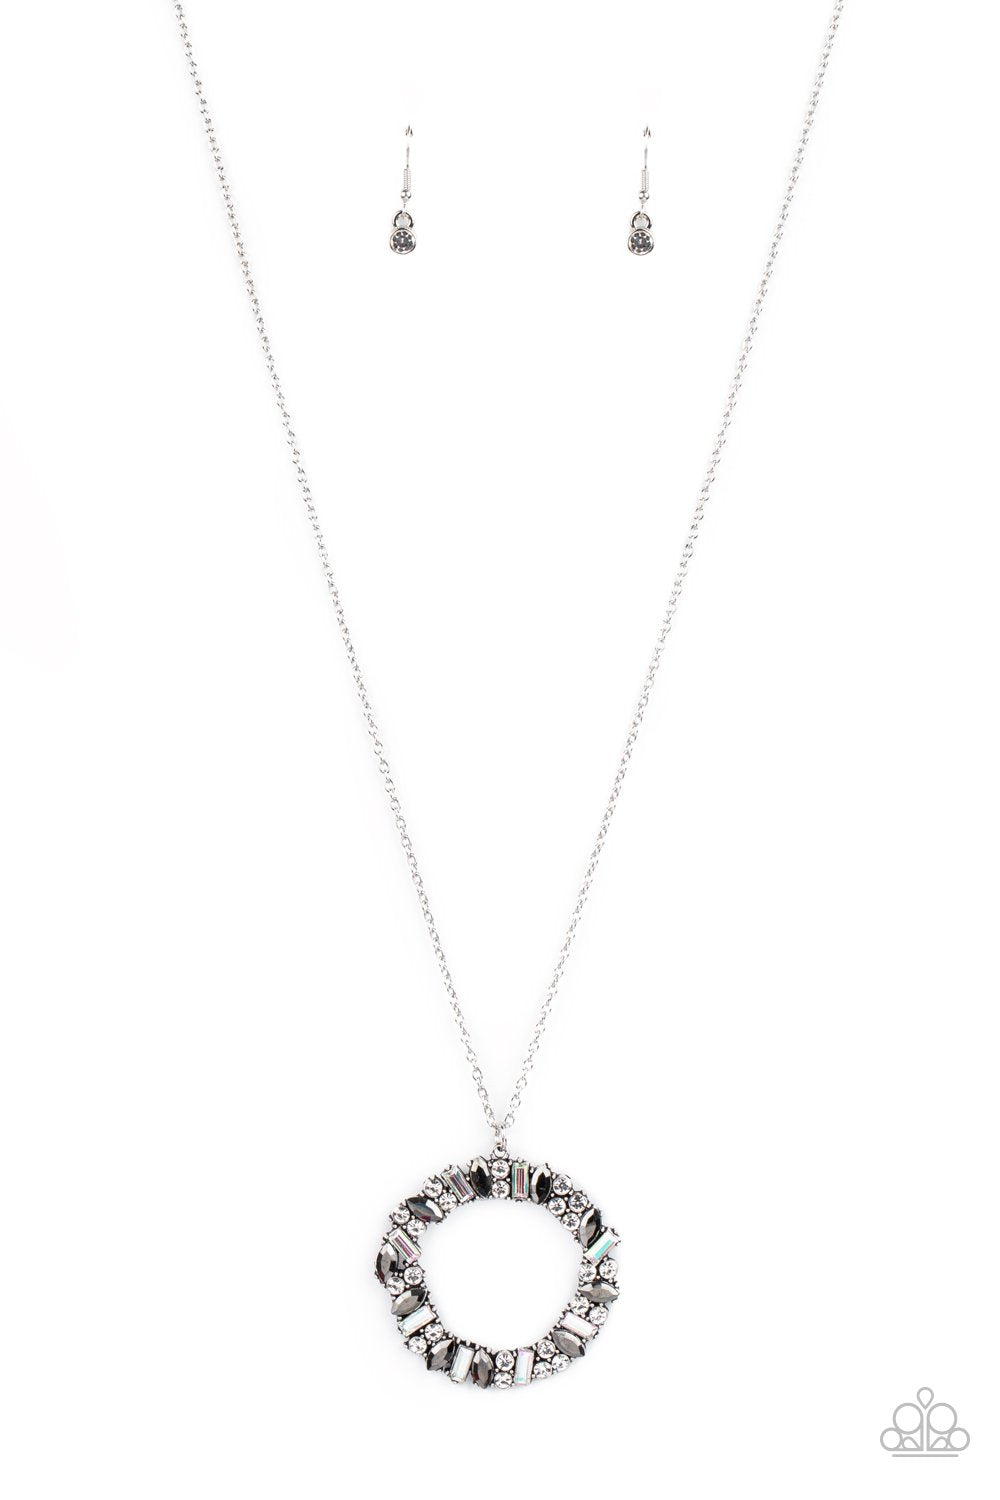 Wreathed in Wealth - Silver Iridescent Necklace